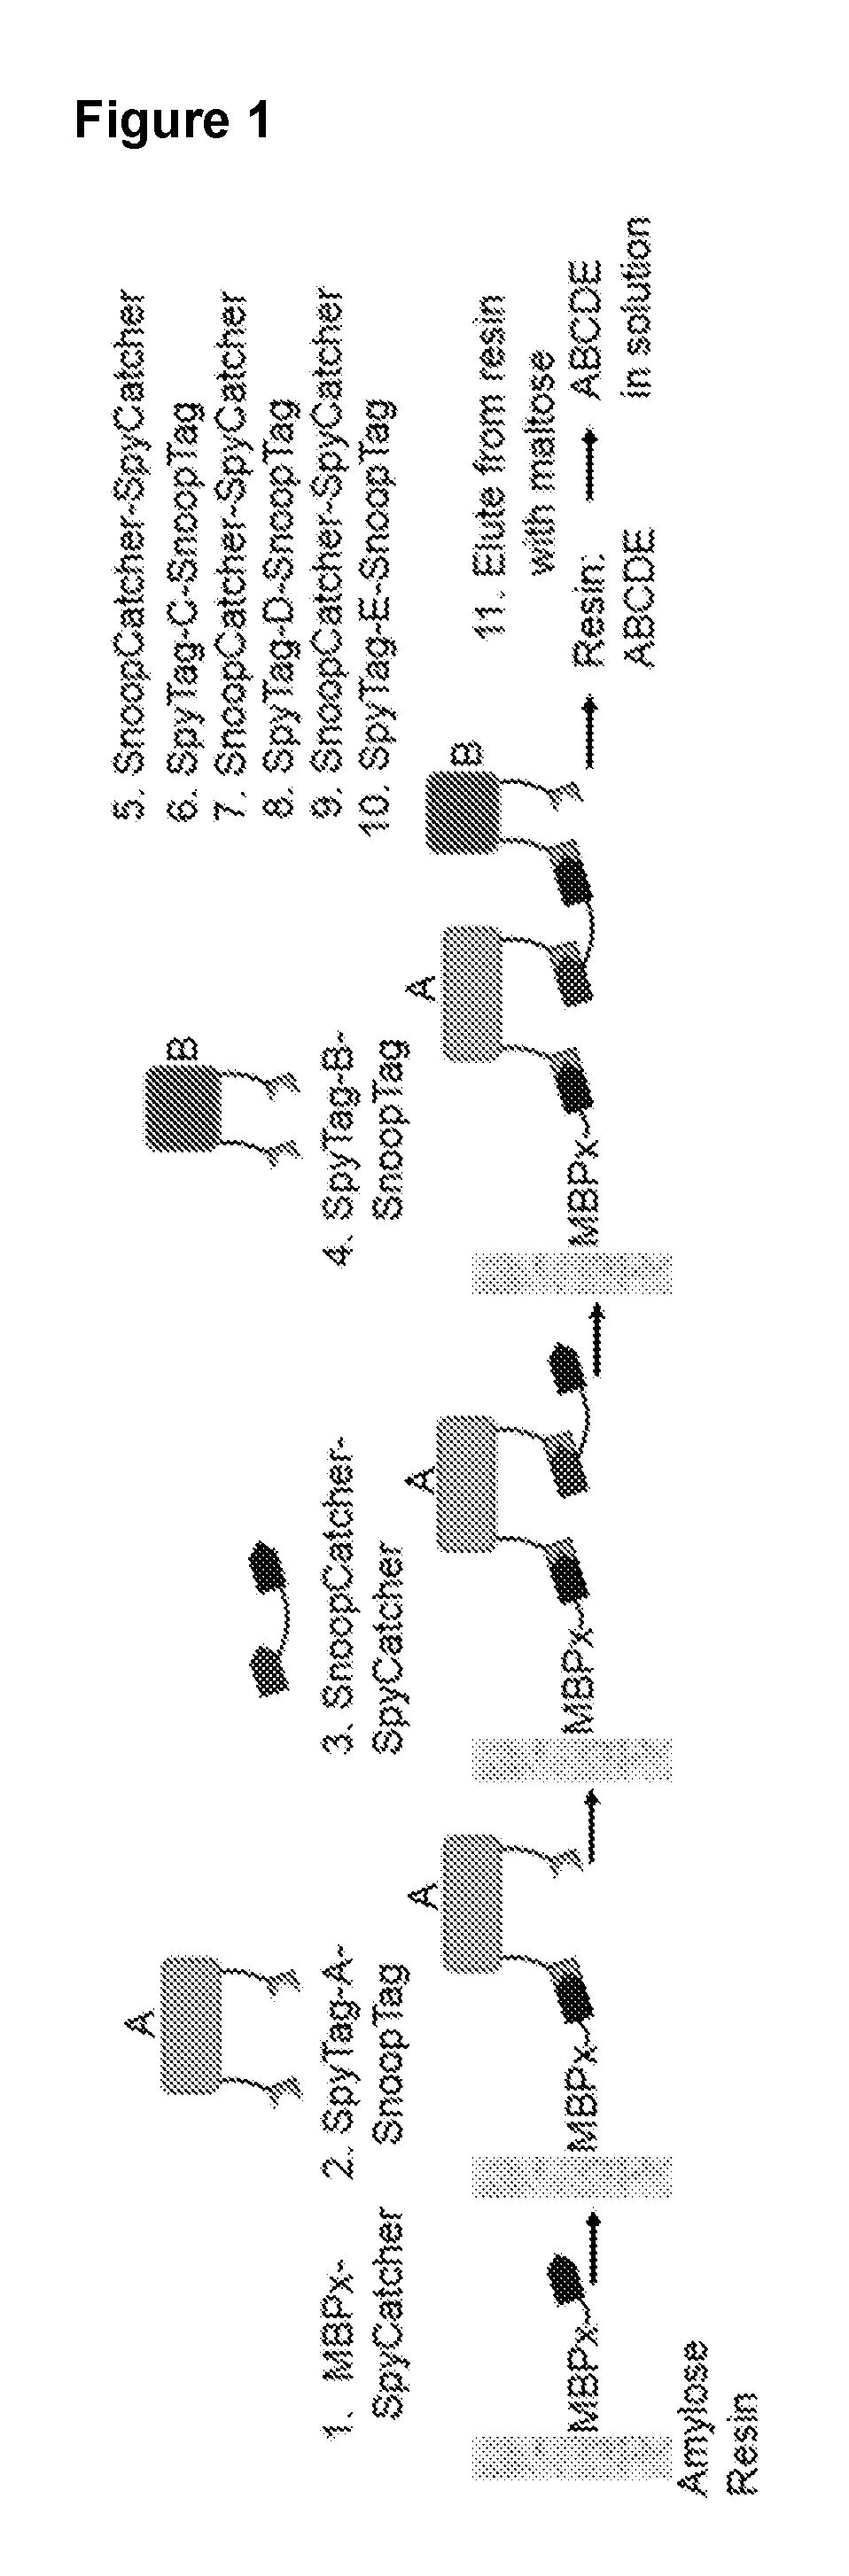 Methods and products for fusion protein synthesis